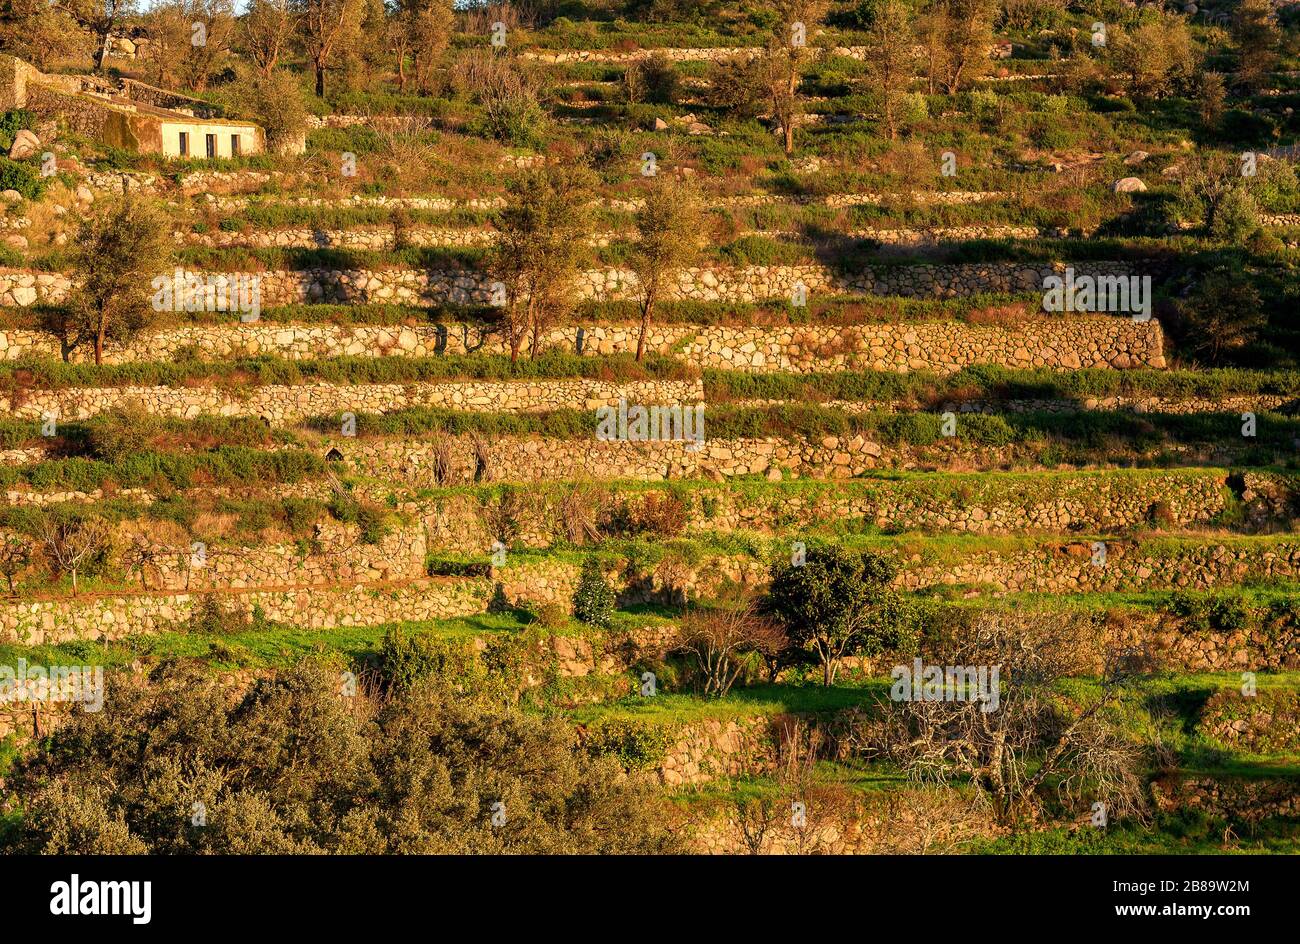 traditional terrace cultivation with dry-stone walls on the slope of the Foia, Portugal, Algarve, Serra de Monchique Stock Photo